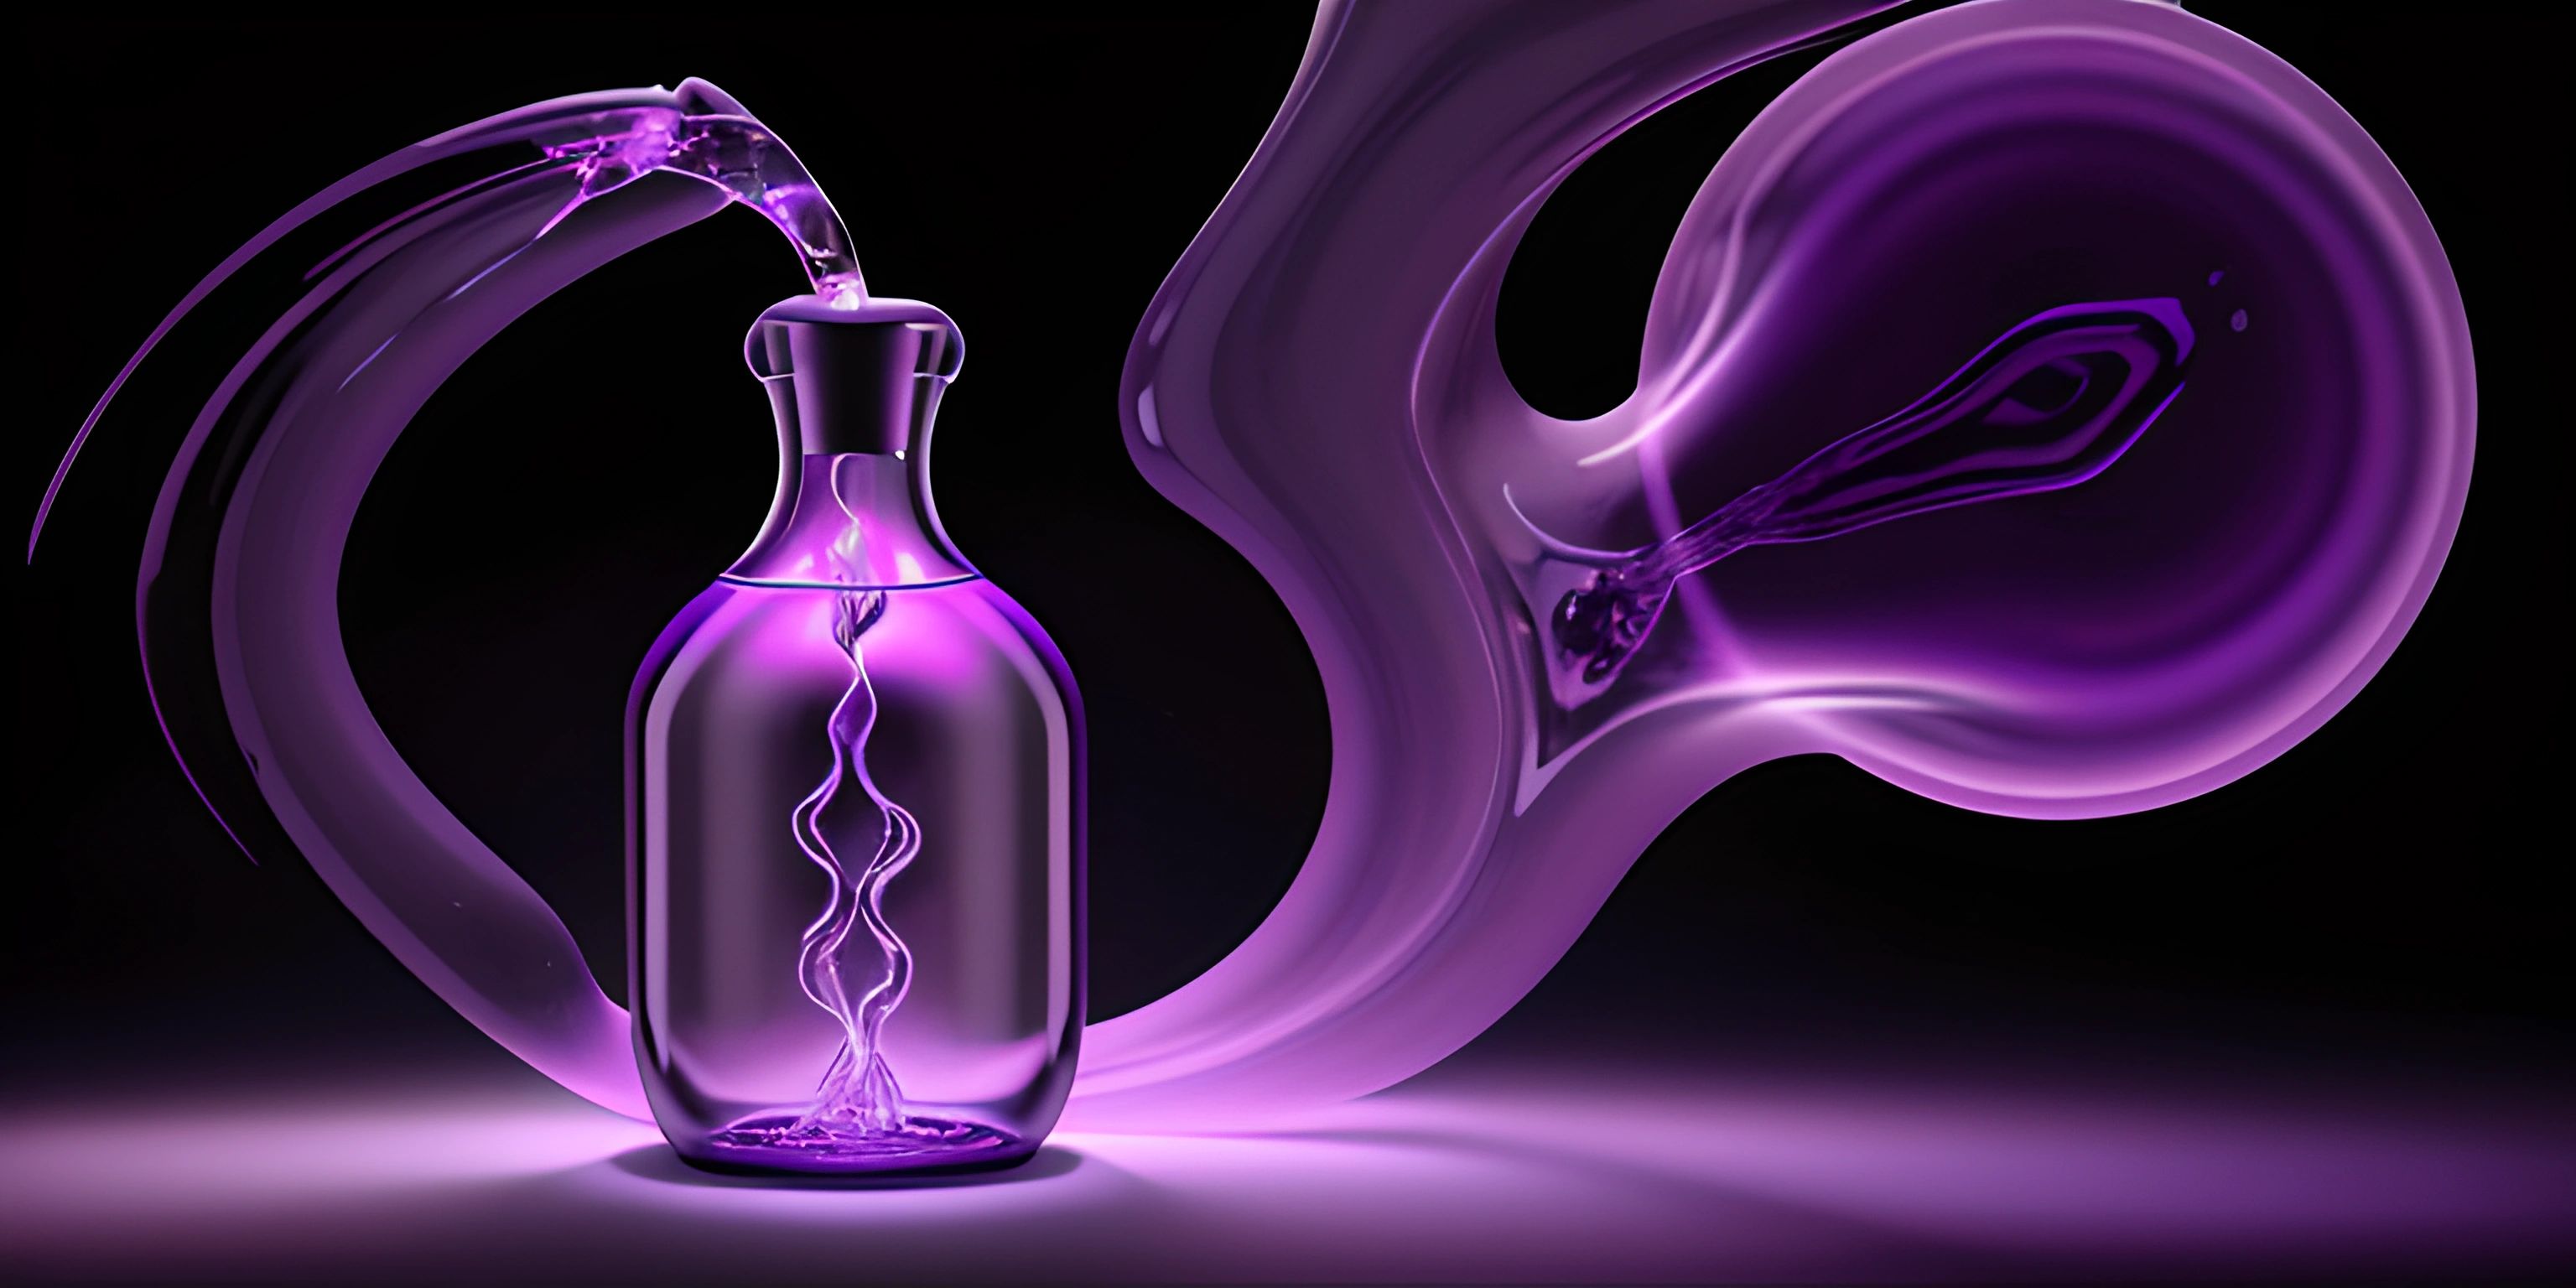 the purple swirl is created using glass bottles and a vase next to it and the bottle is a vase